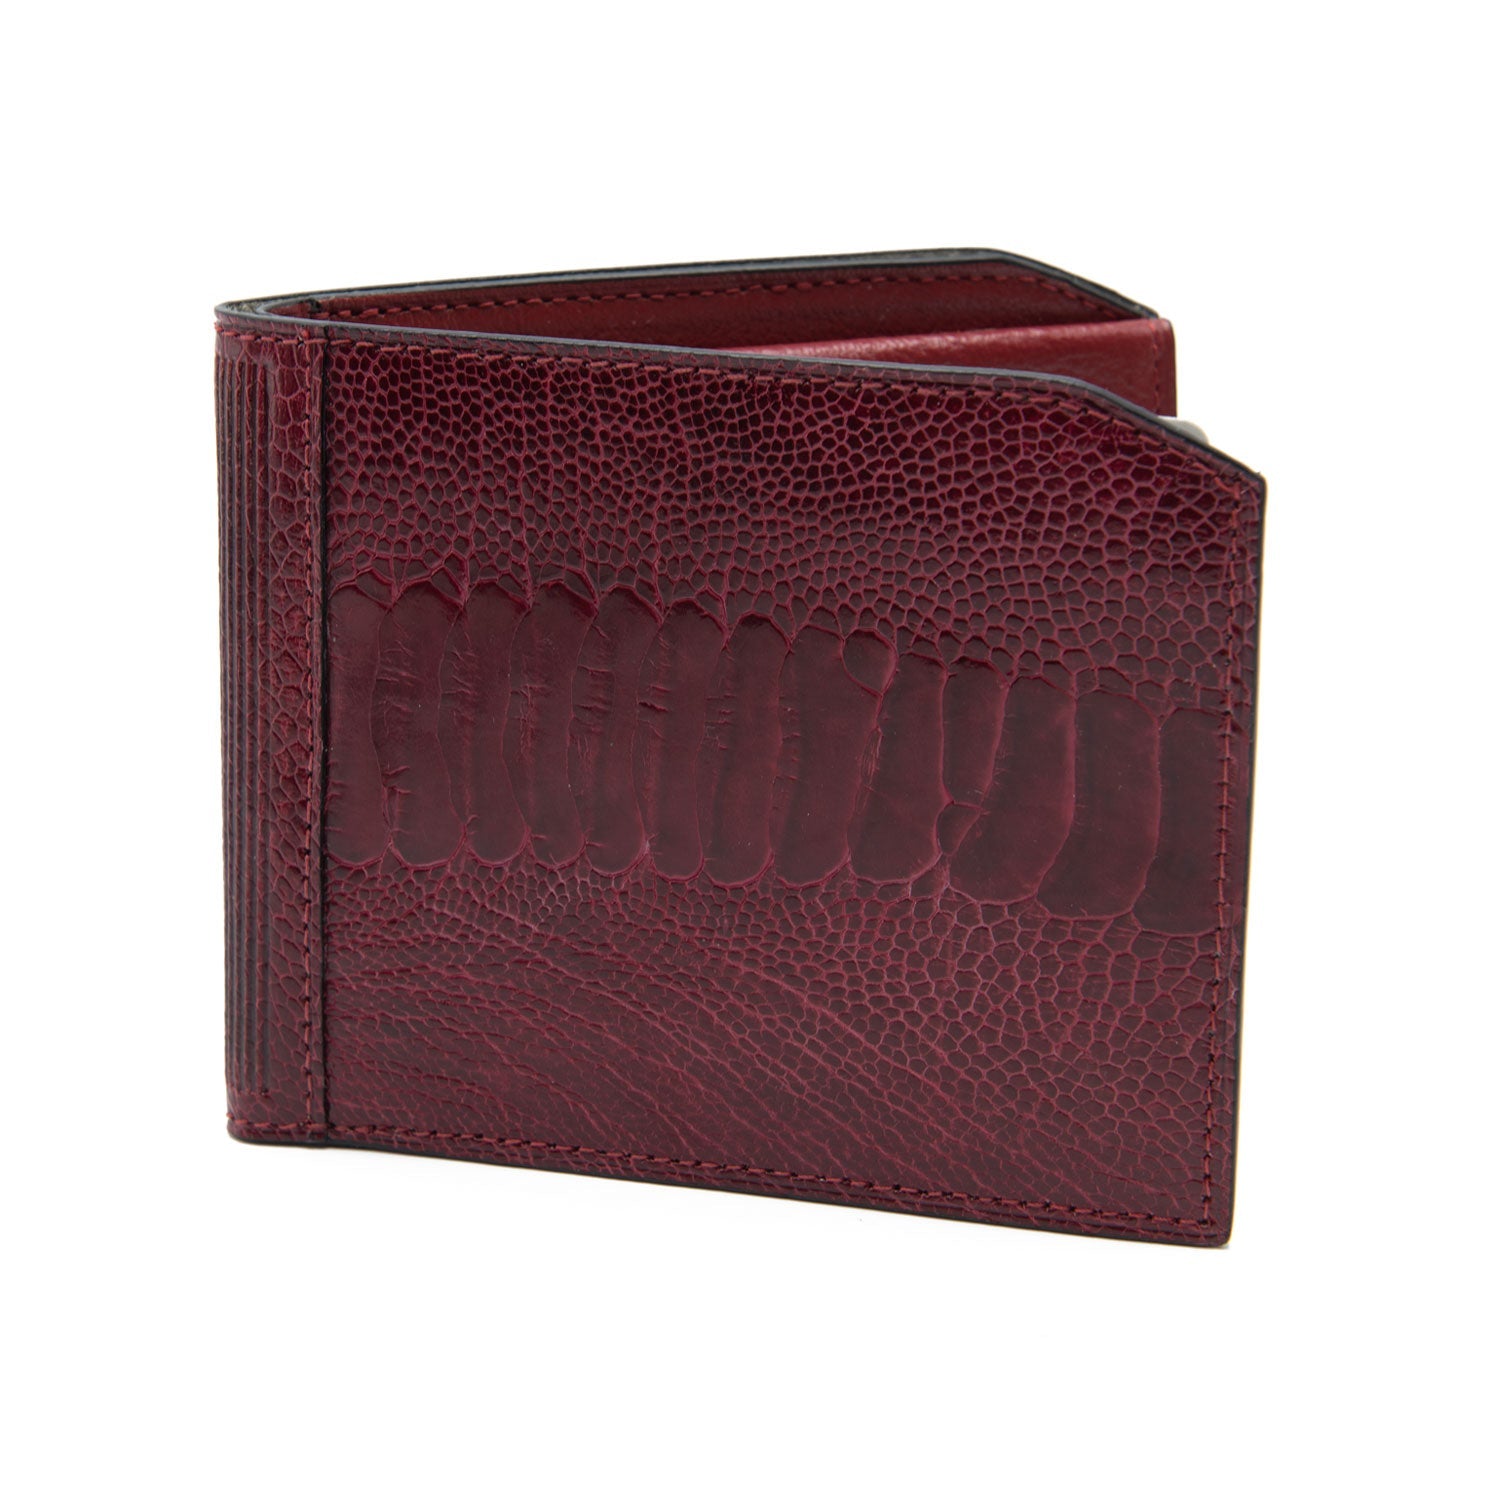 Sante Fe Ostrich Shin Leather Bill & Coin Wallet for Sale Online